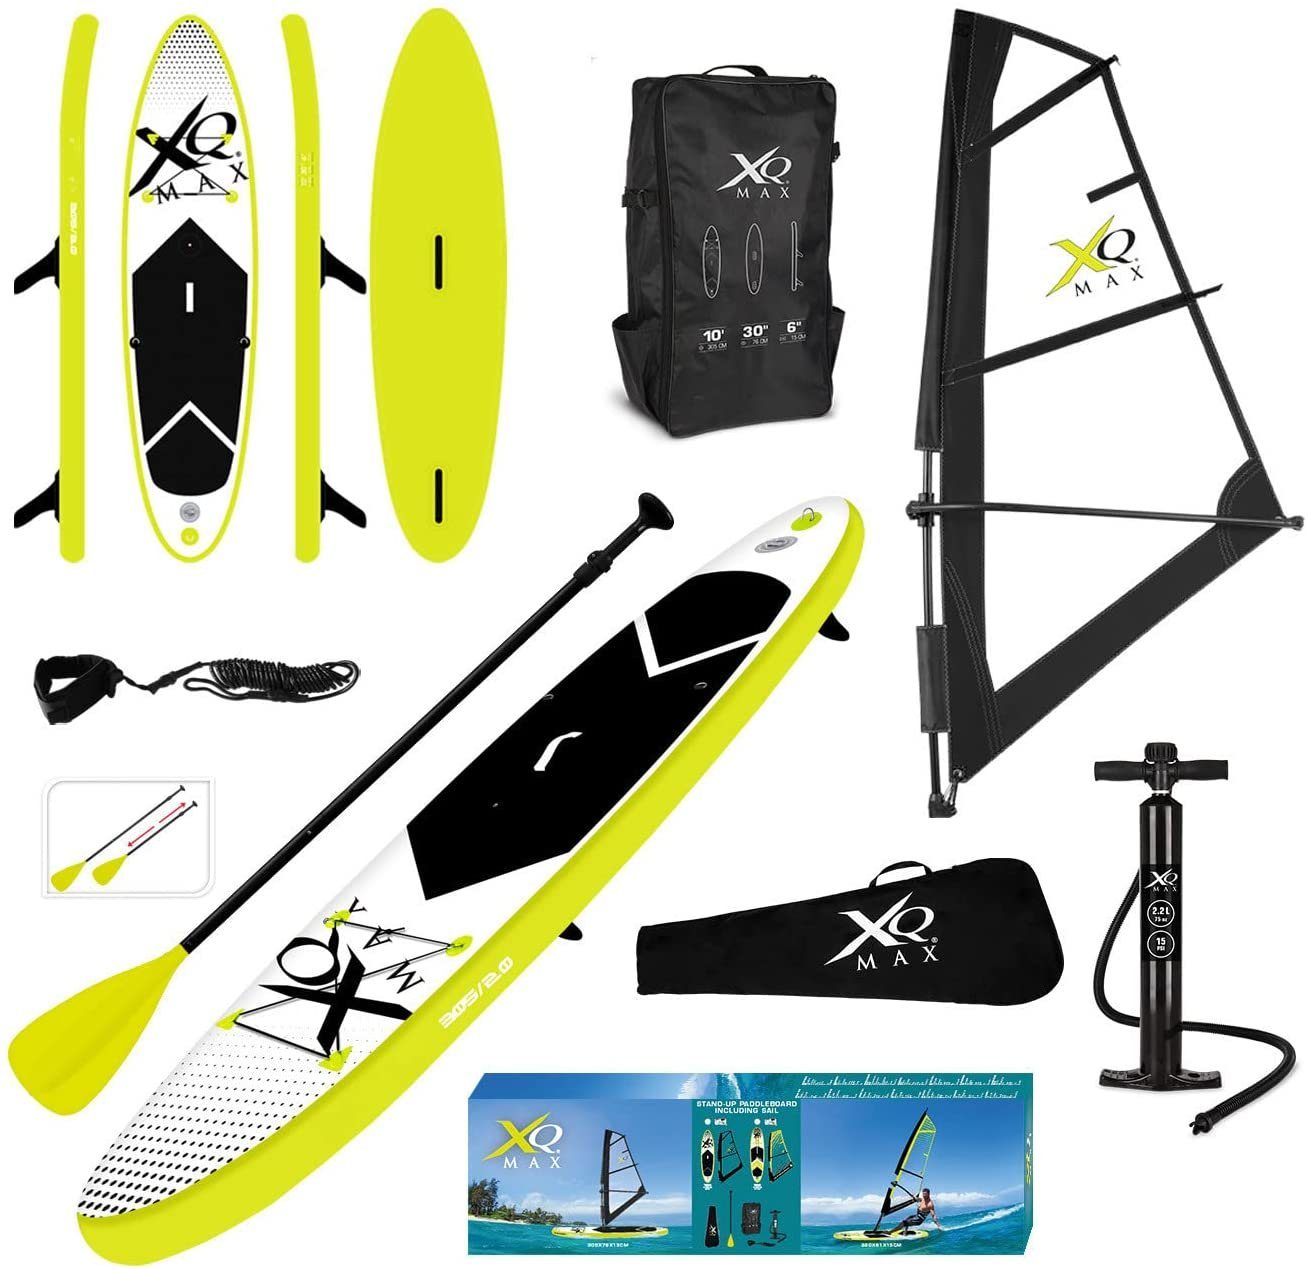 XQMAX Inflatable SUP-Board »SEGEL« online kaufen | OTTO